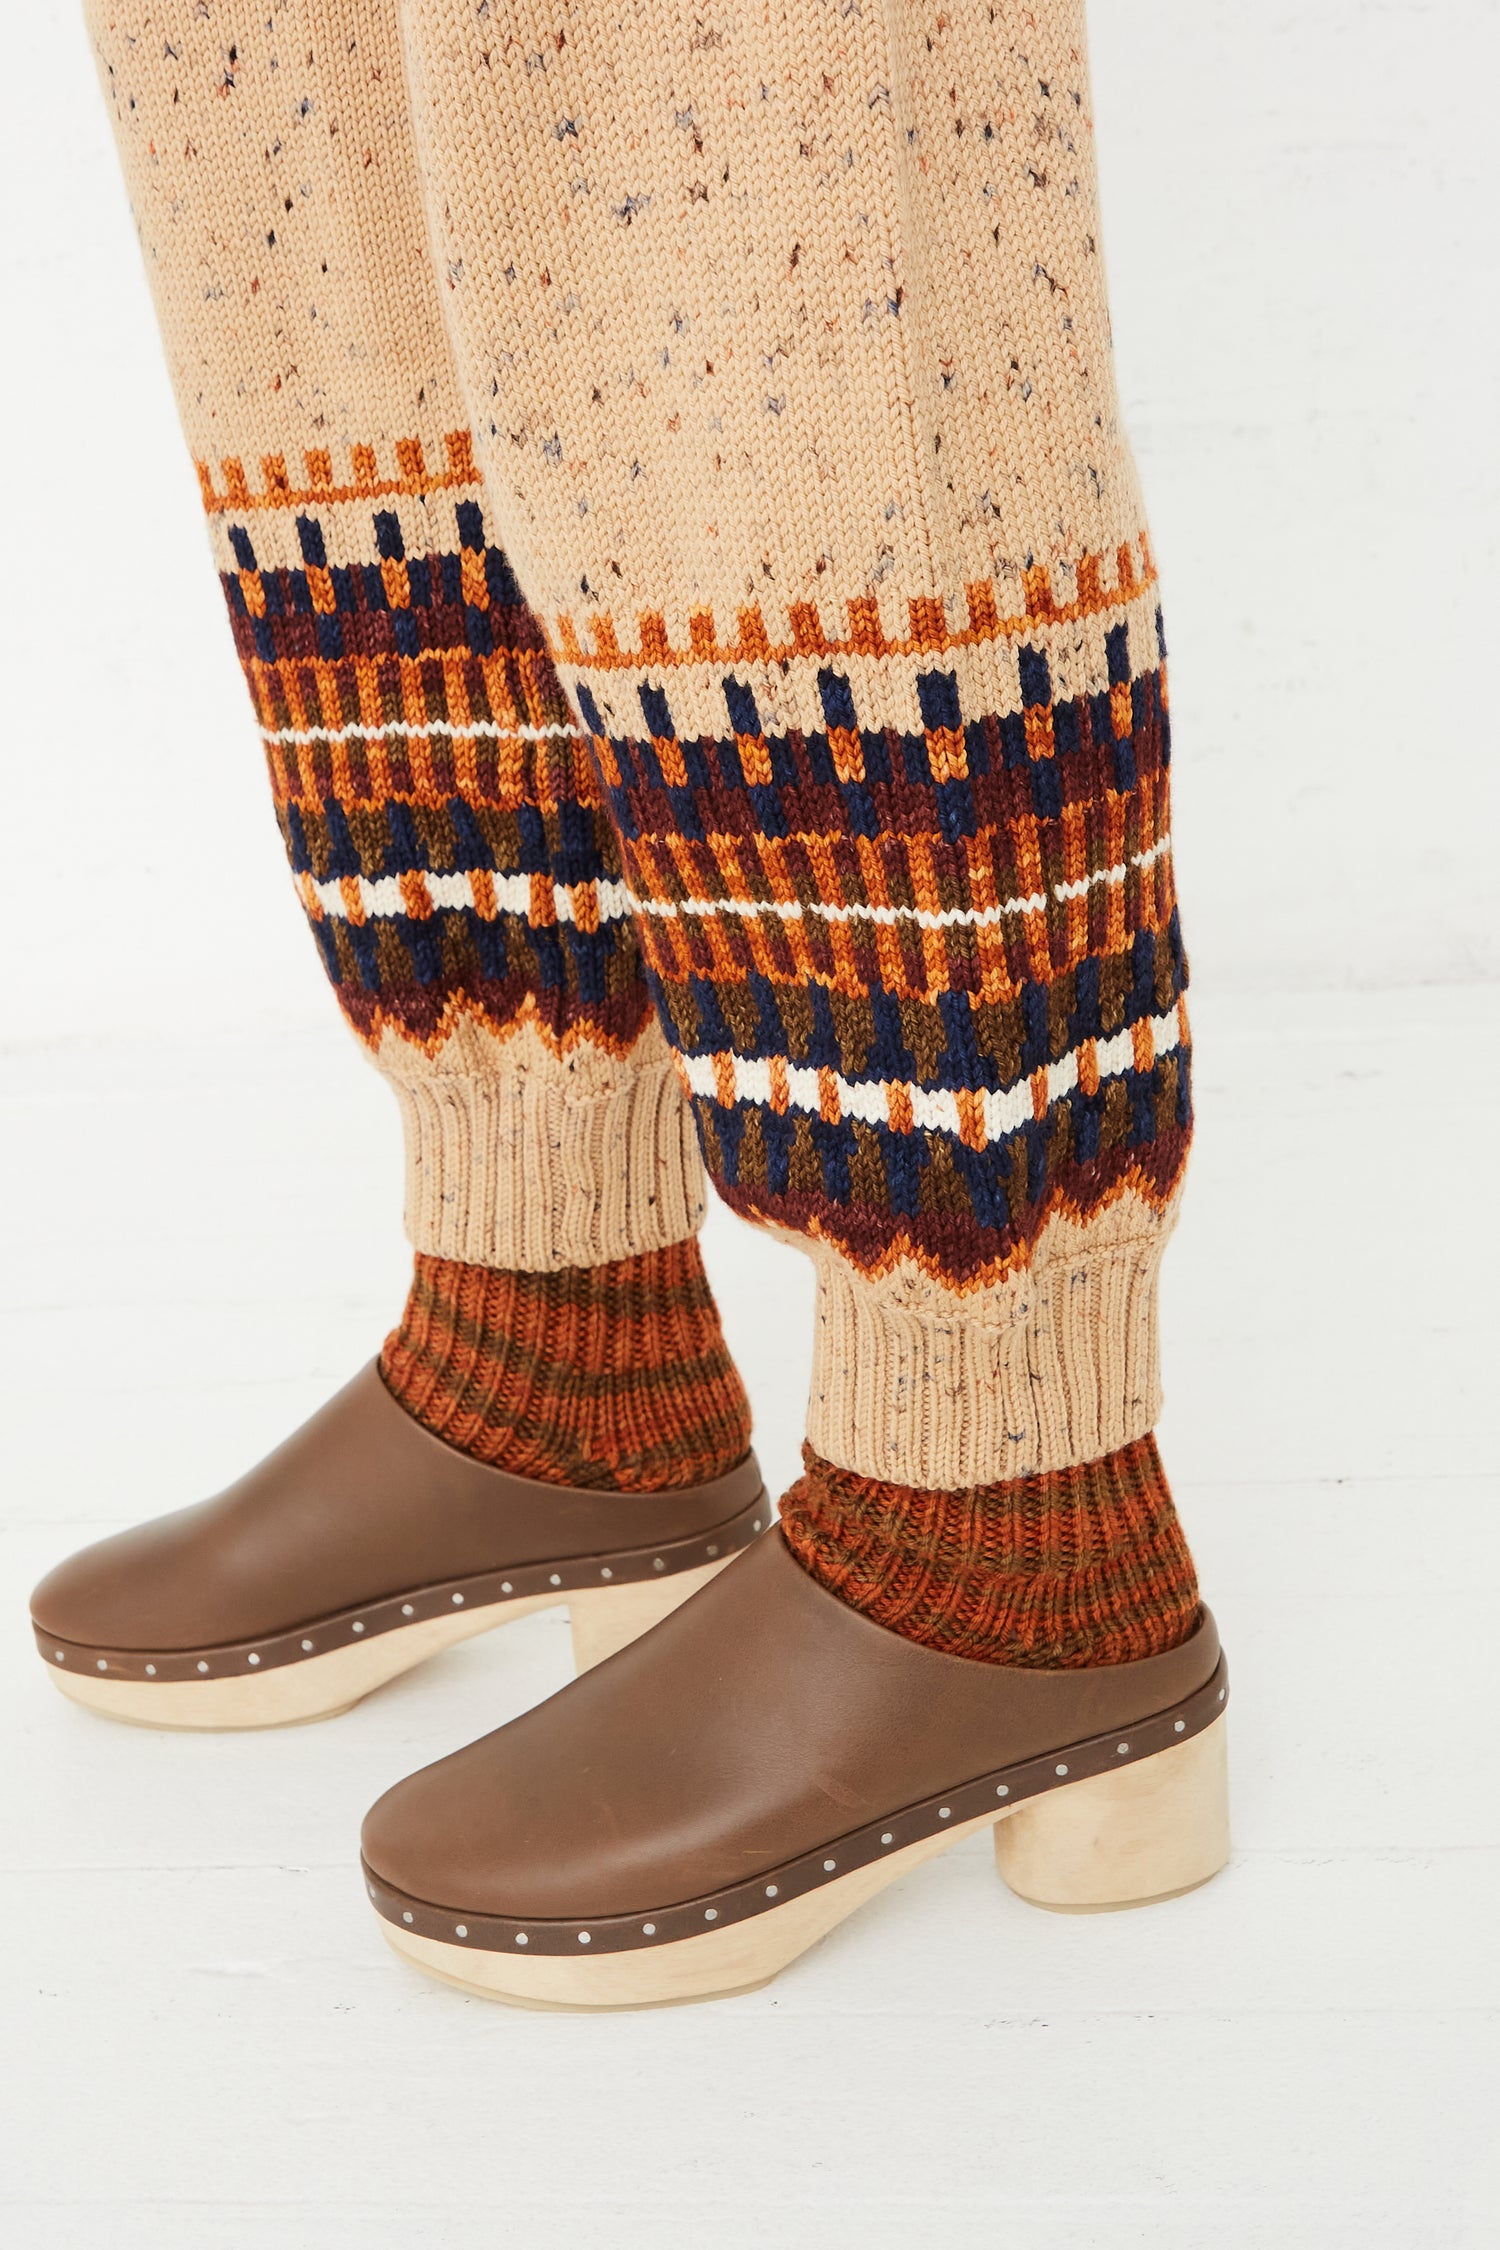 A woman wearing a pair of Fair Isle Warm-Up Pants in Seed Confetti by Misha & Puff and brown boots.